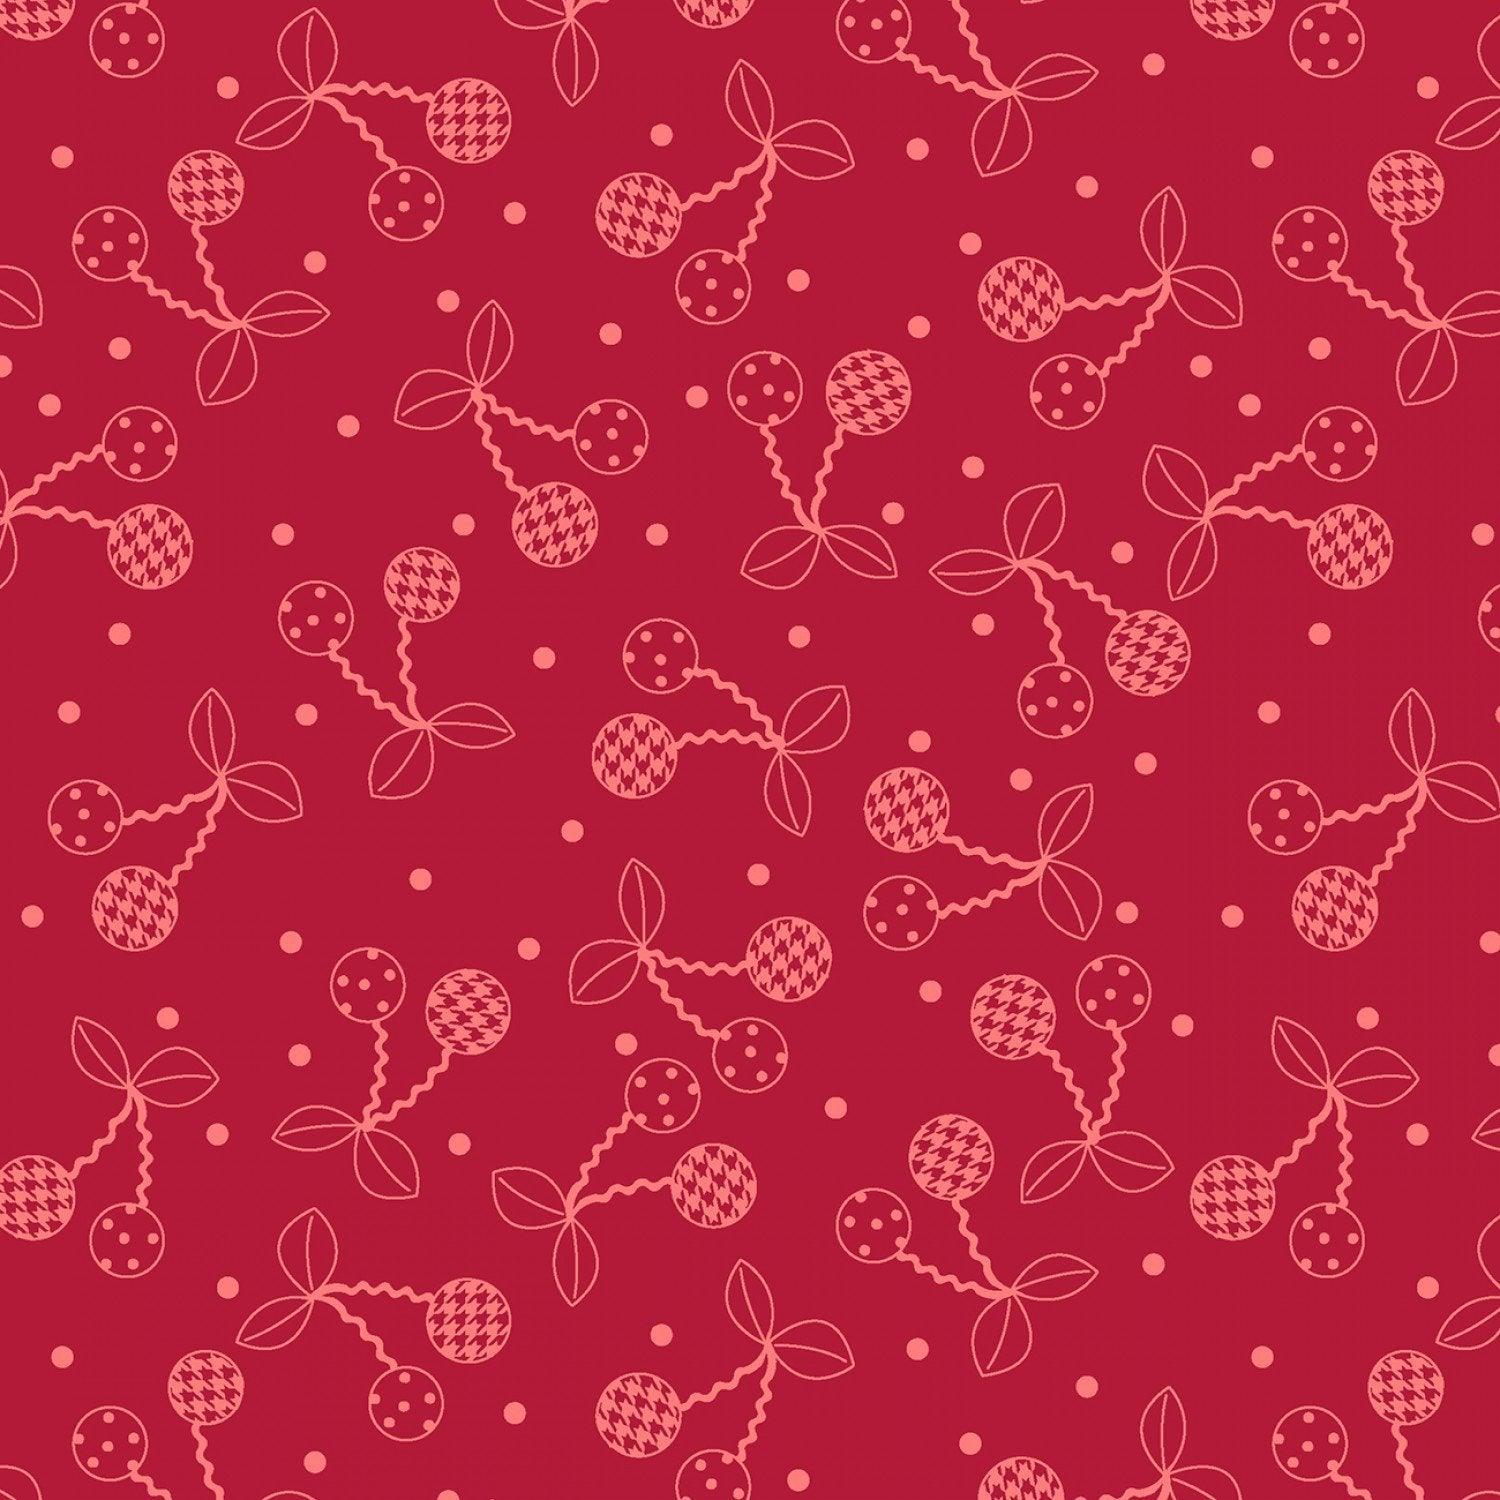 Cheerful Cherries - Pink/Red - 44" Wide - Kimberbell Basics - Kawartha Quilting and Sewing LTD.